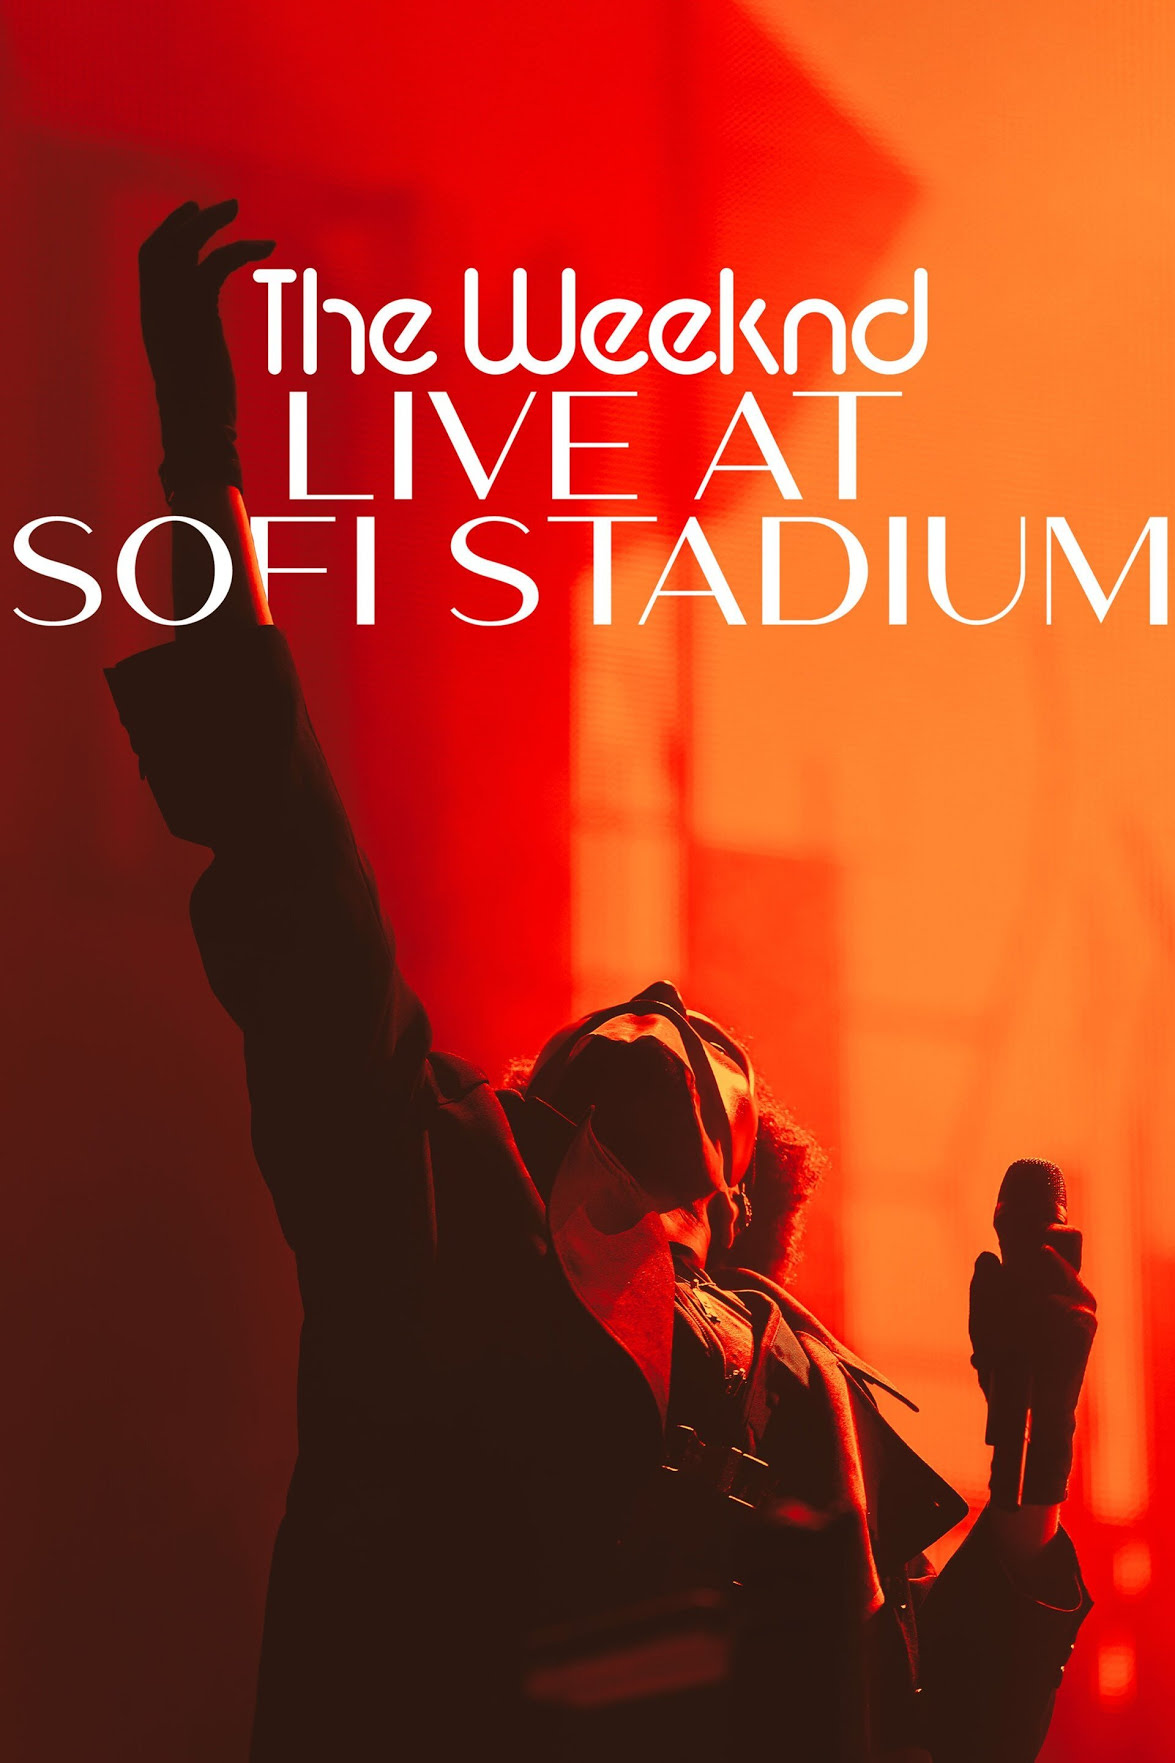 The Weeknd The Weeknd Live At SoFi Stadium Reviews Album of The Year